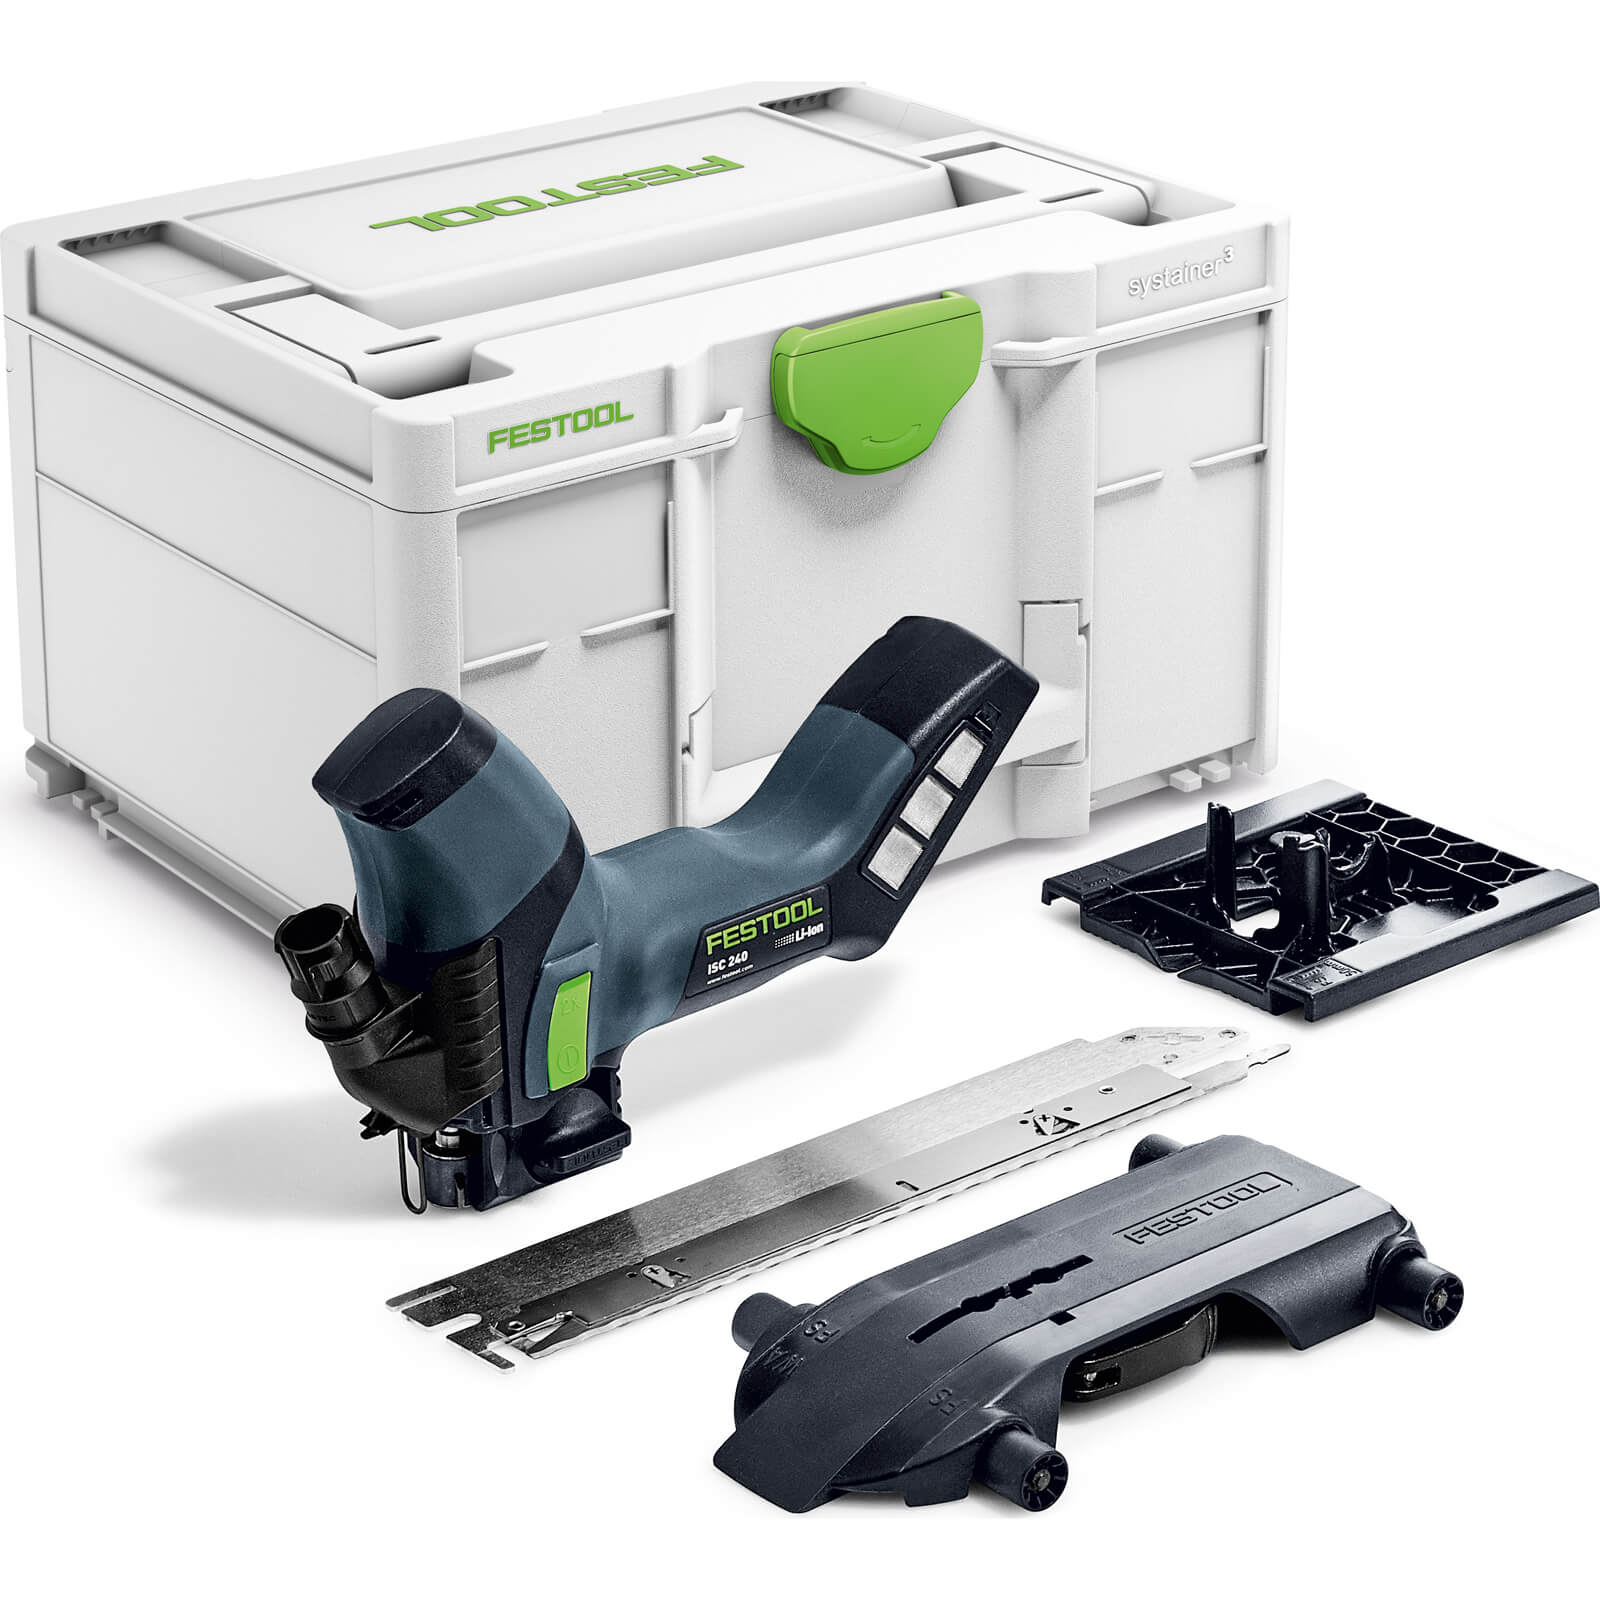 Image of Festool ISC 240 18v Cordless Brushless Insulation Saw No Batteries No Charger Case